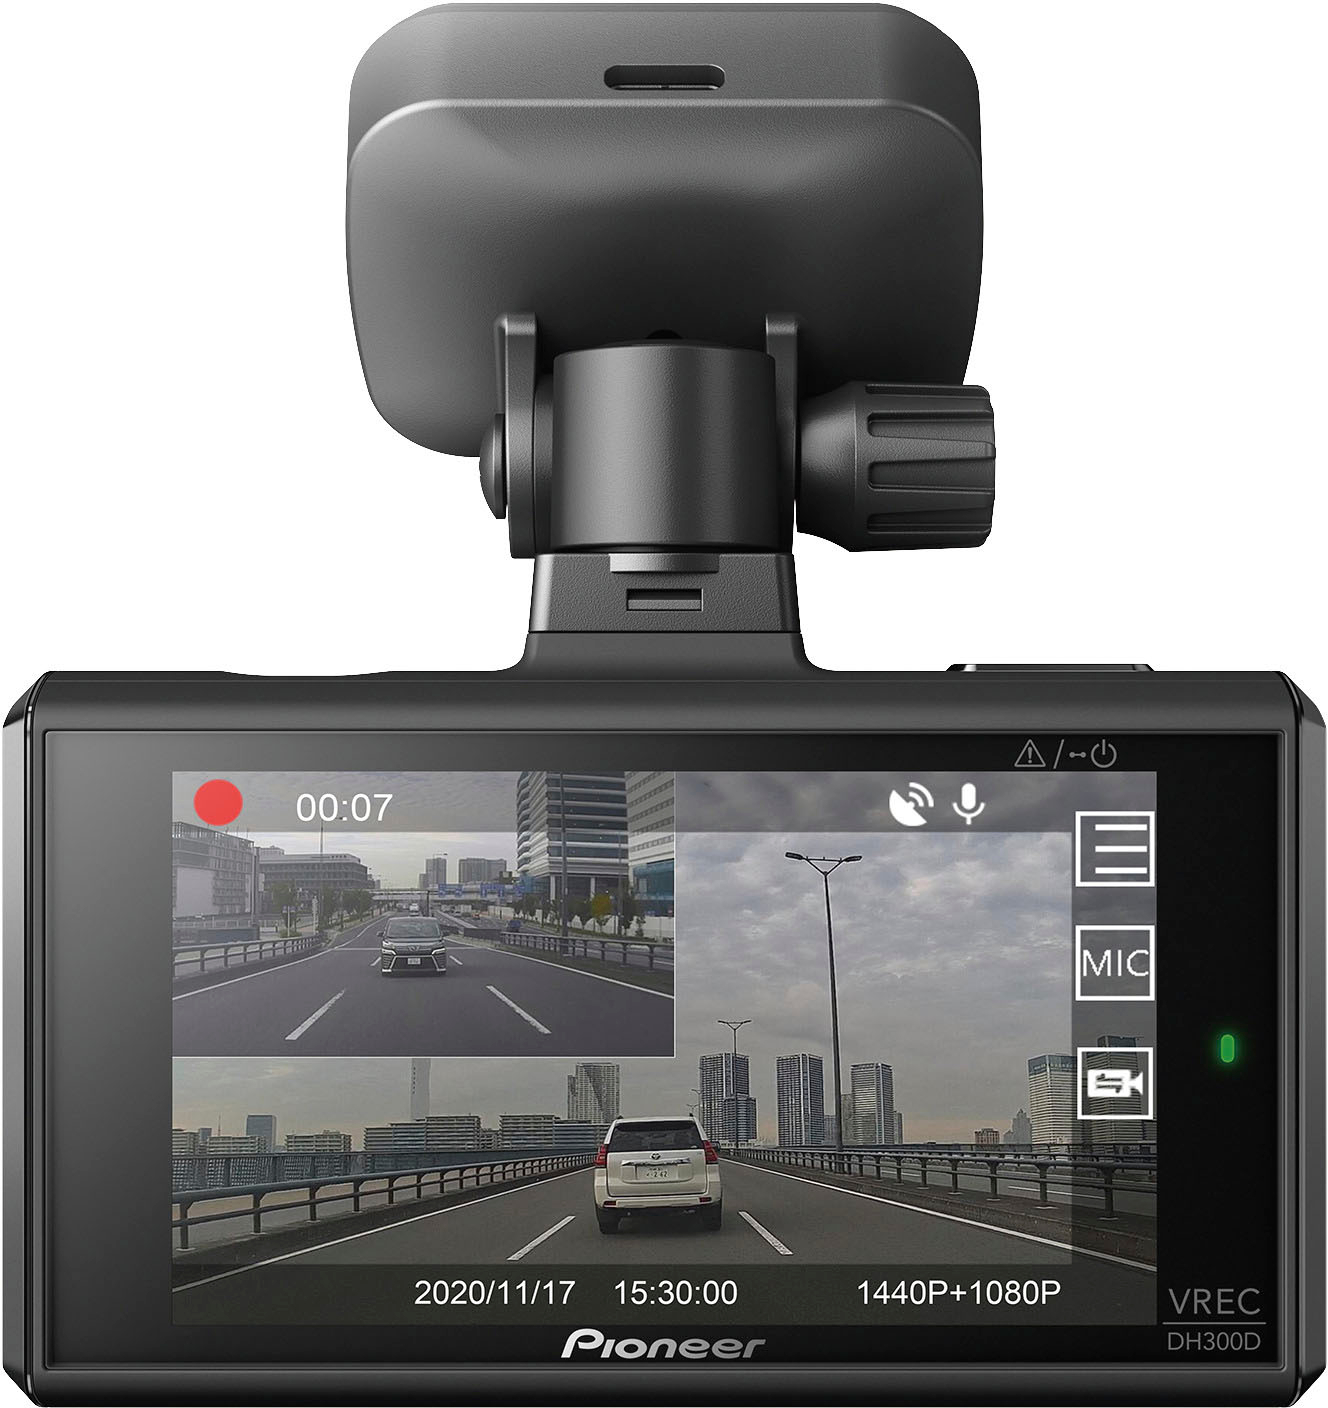 5 Best 2 Channel Dash Cams (Top Options and More)